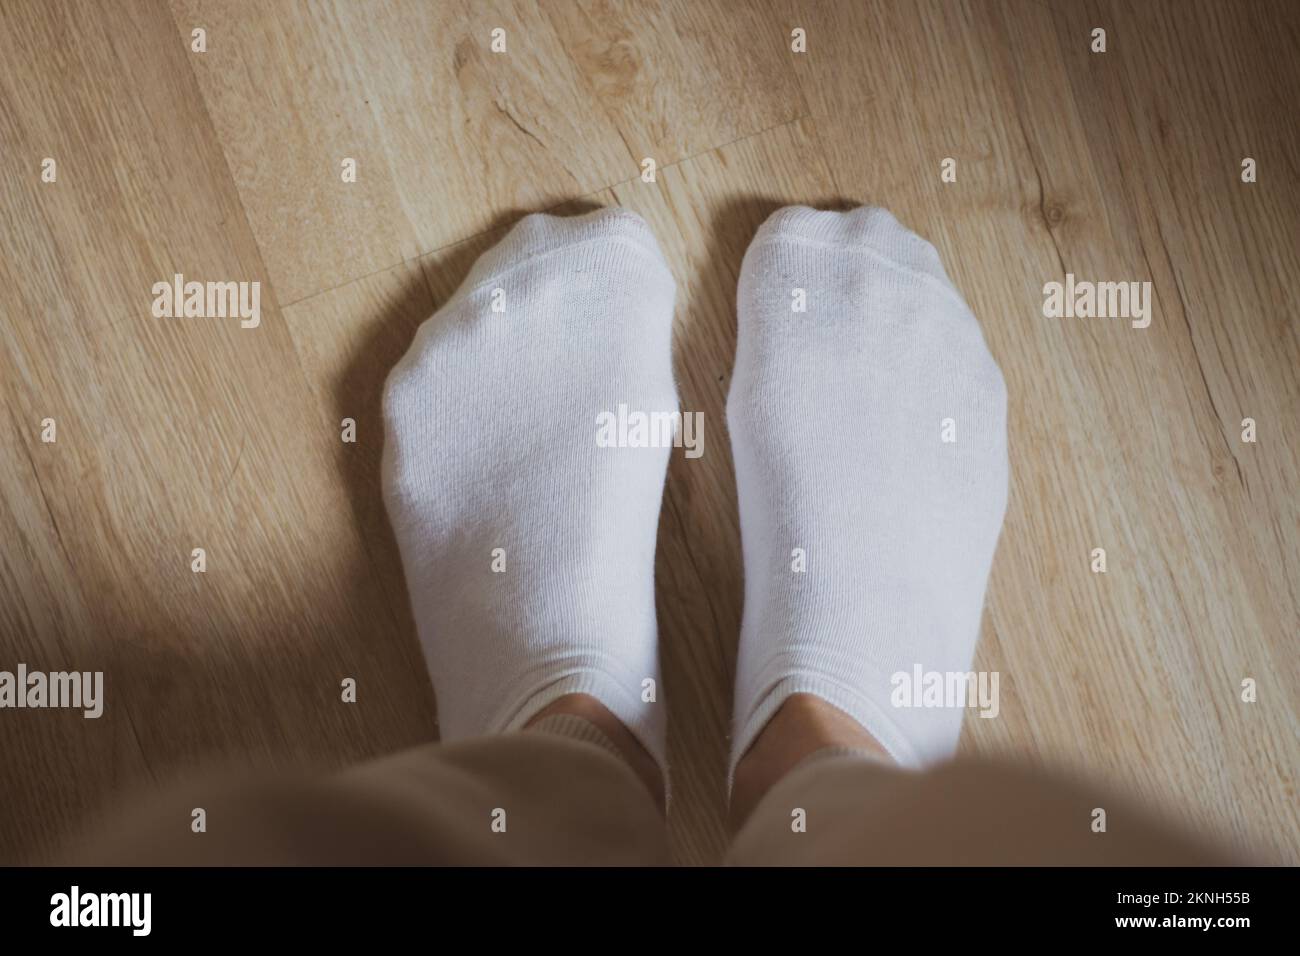 White socks on the floor. Women footwear. Warm clothing concept. Comfortable cotton clothes. Domestic life backgrounds. White socks on girls feet. Stock Photo